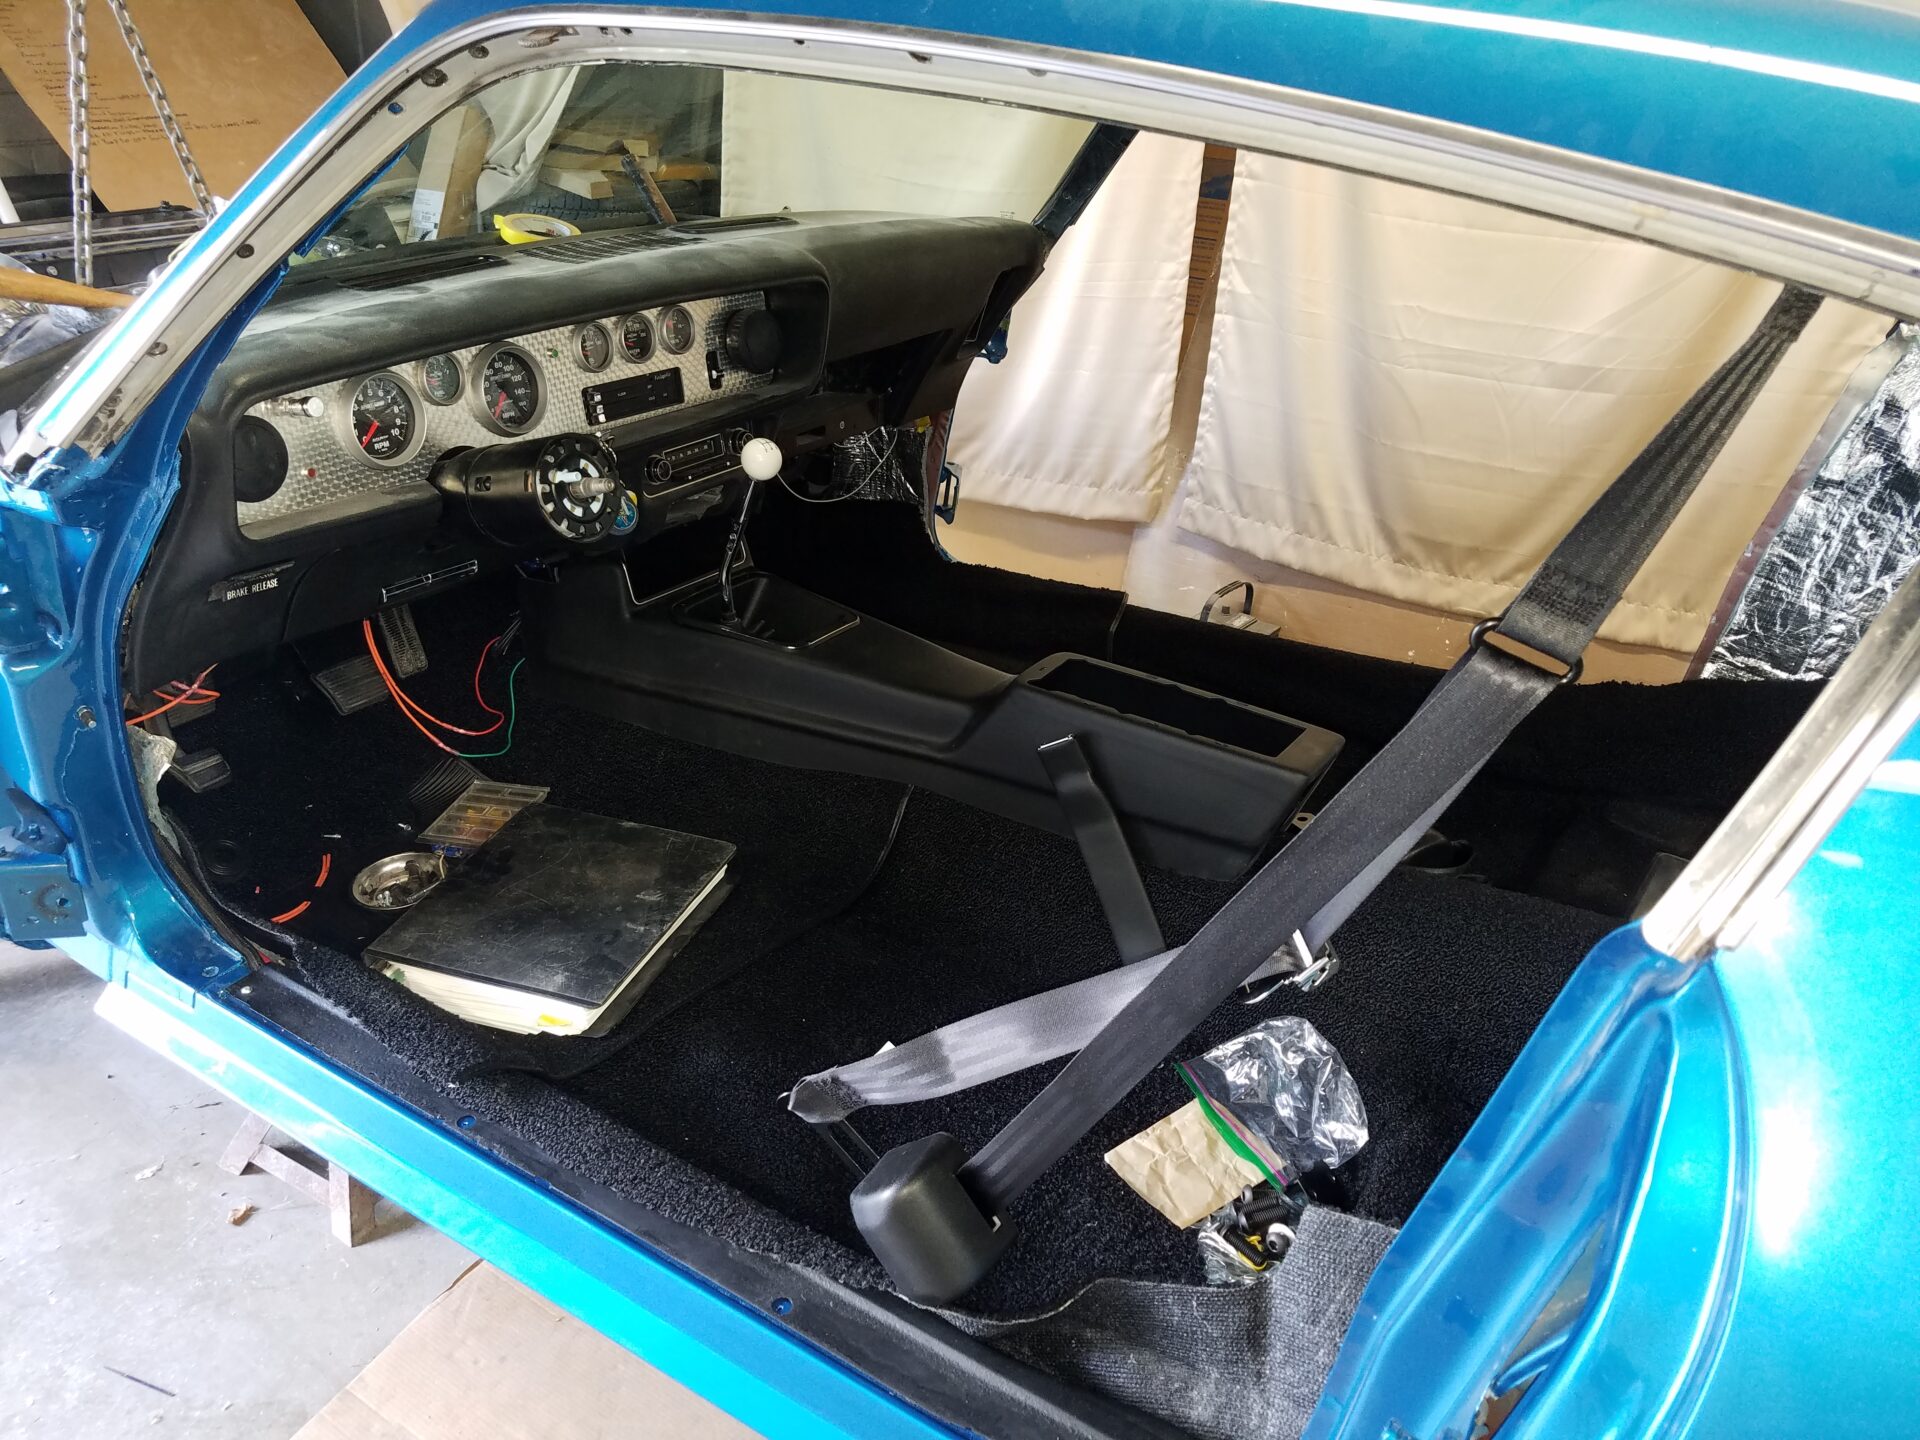 A partially finished car interior